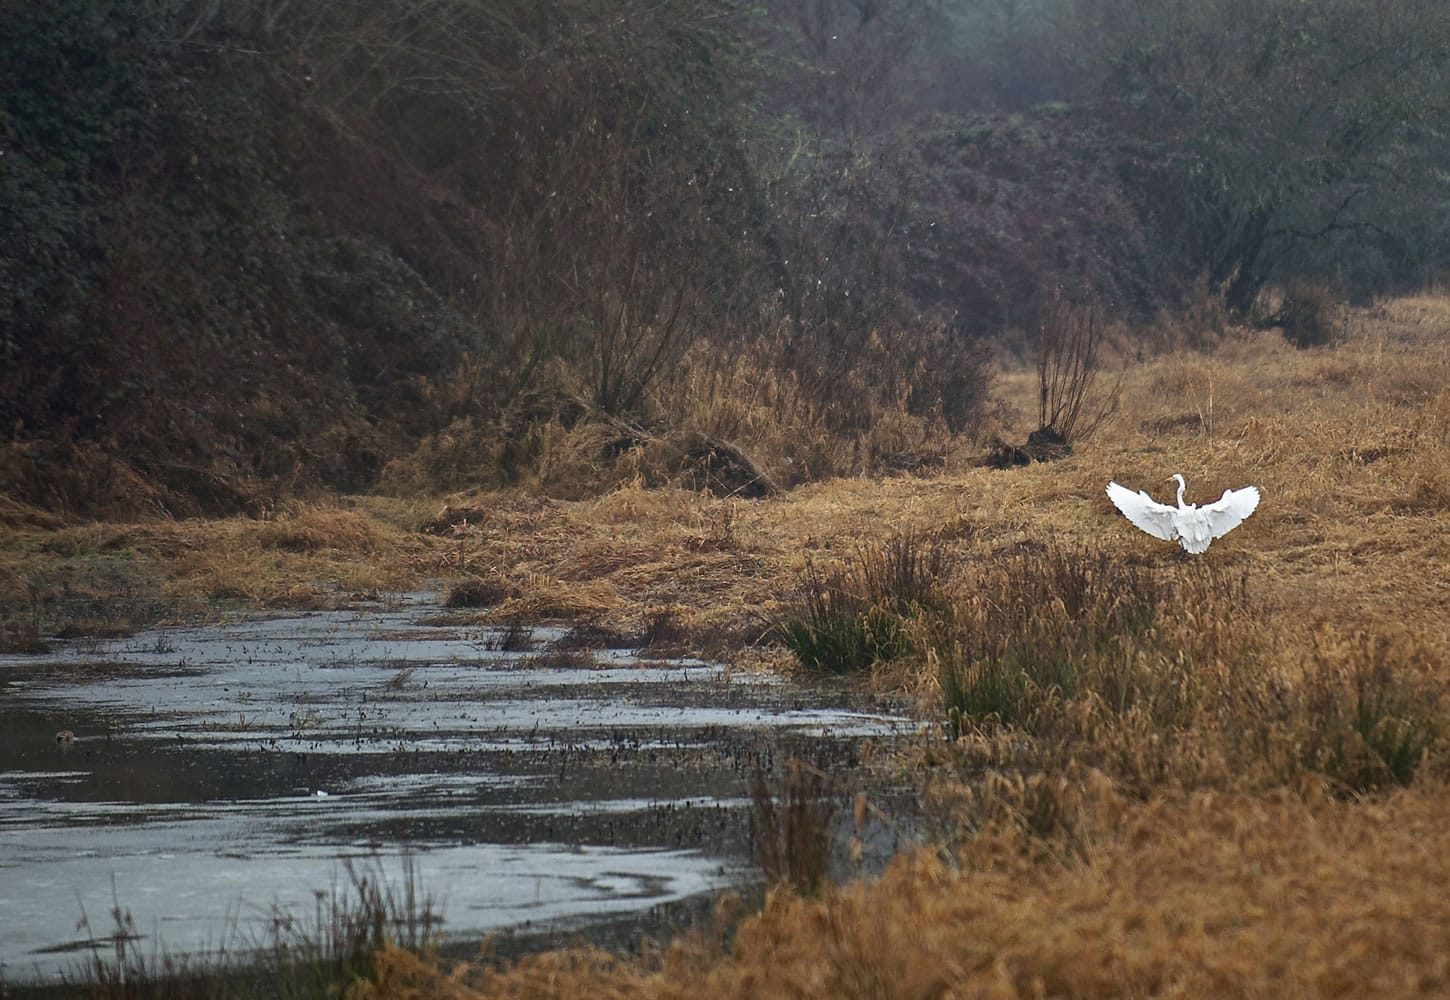 An egret lands near a side channel along the East Fork Lewis River on Friday.